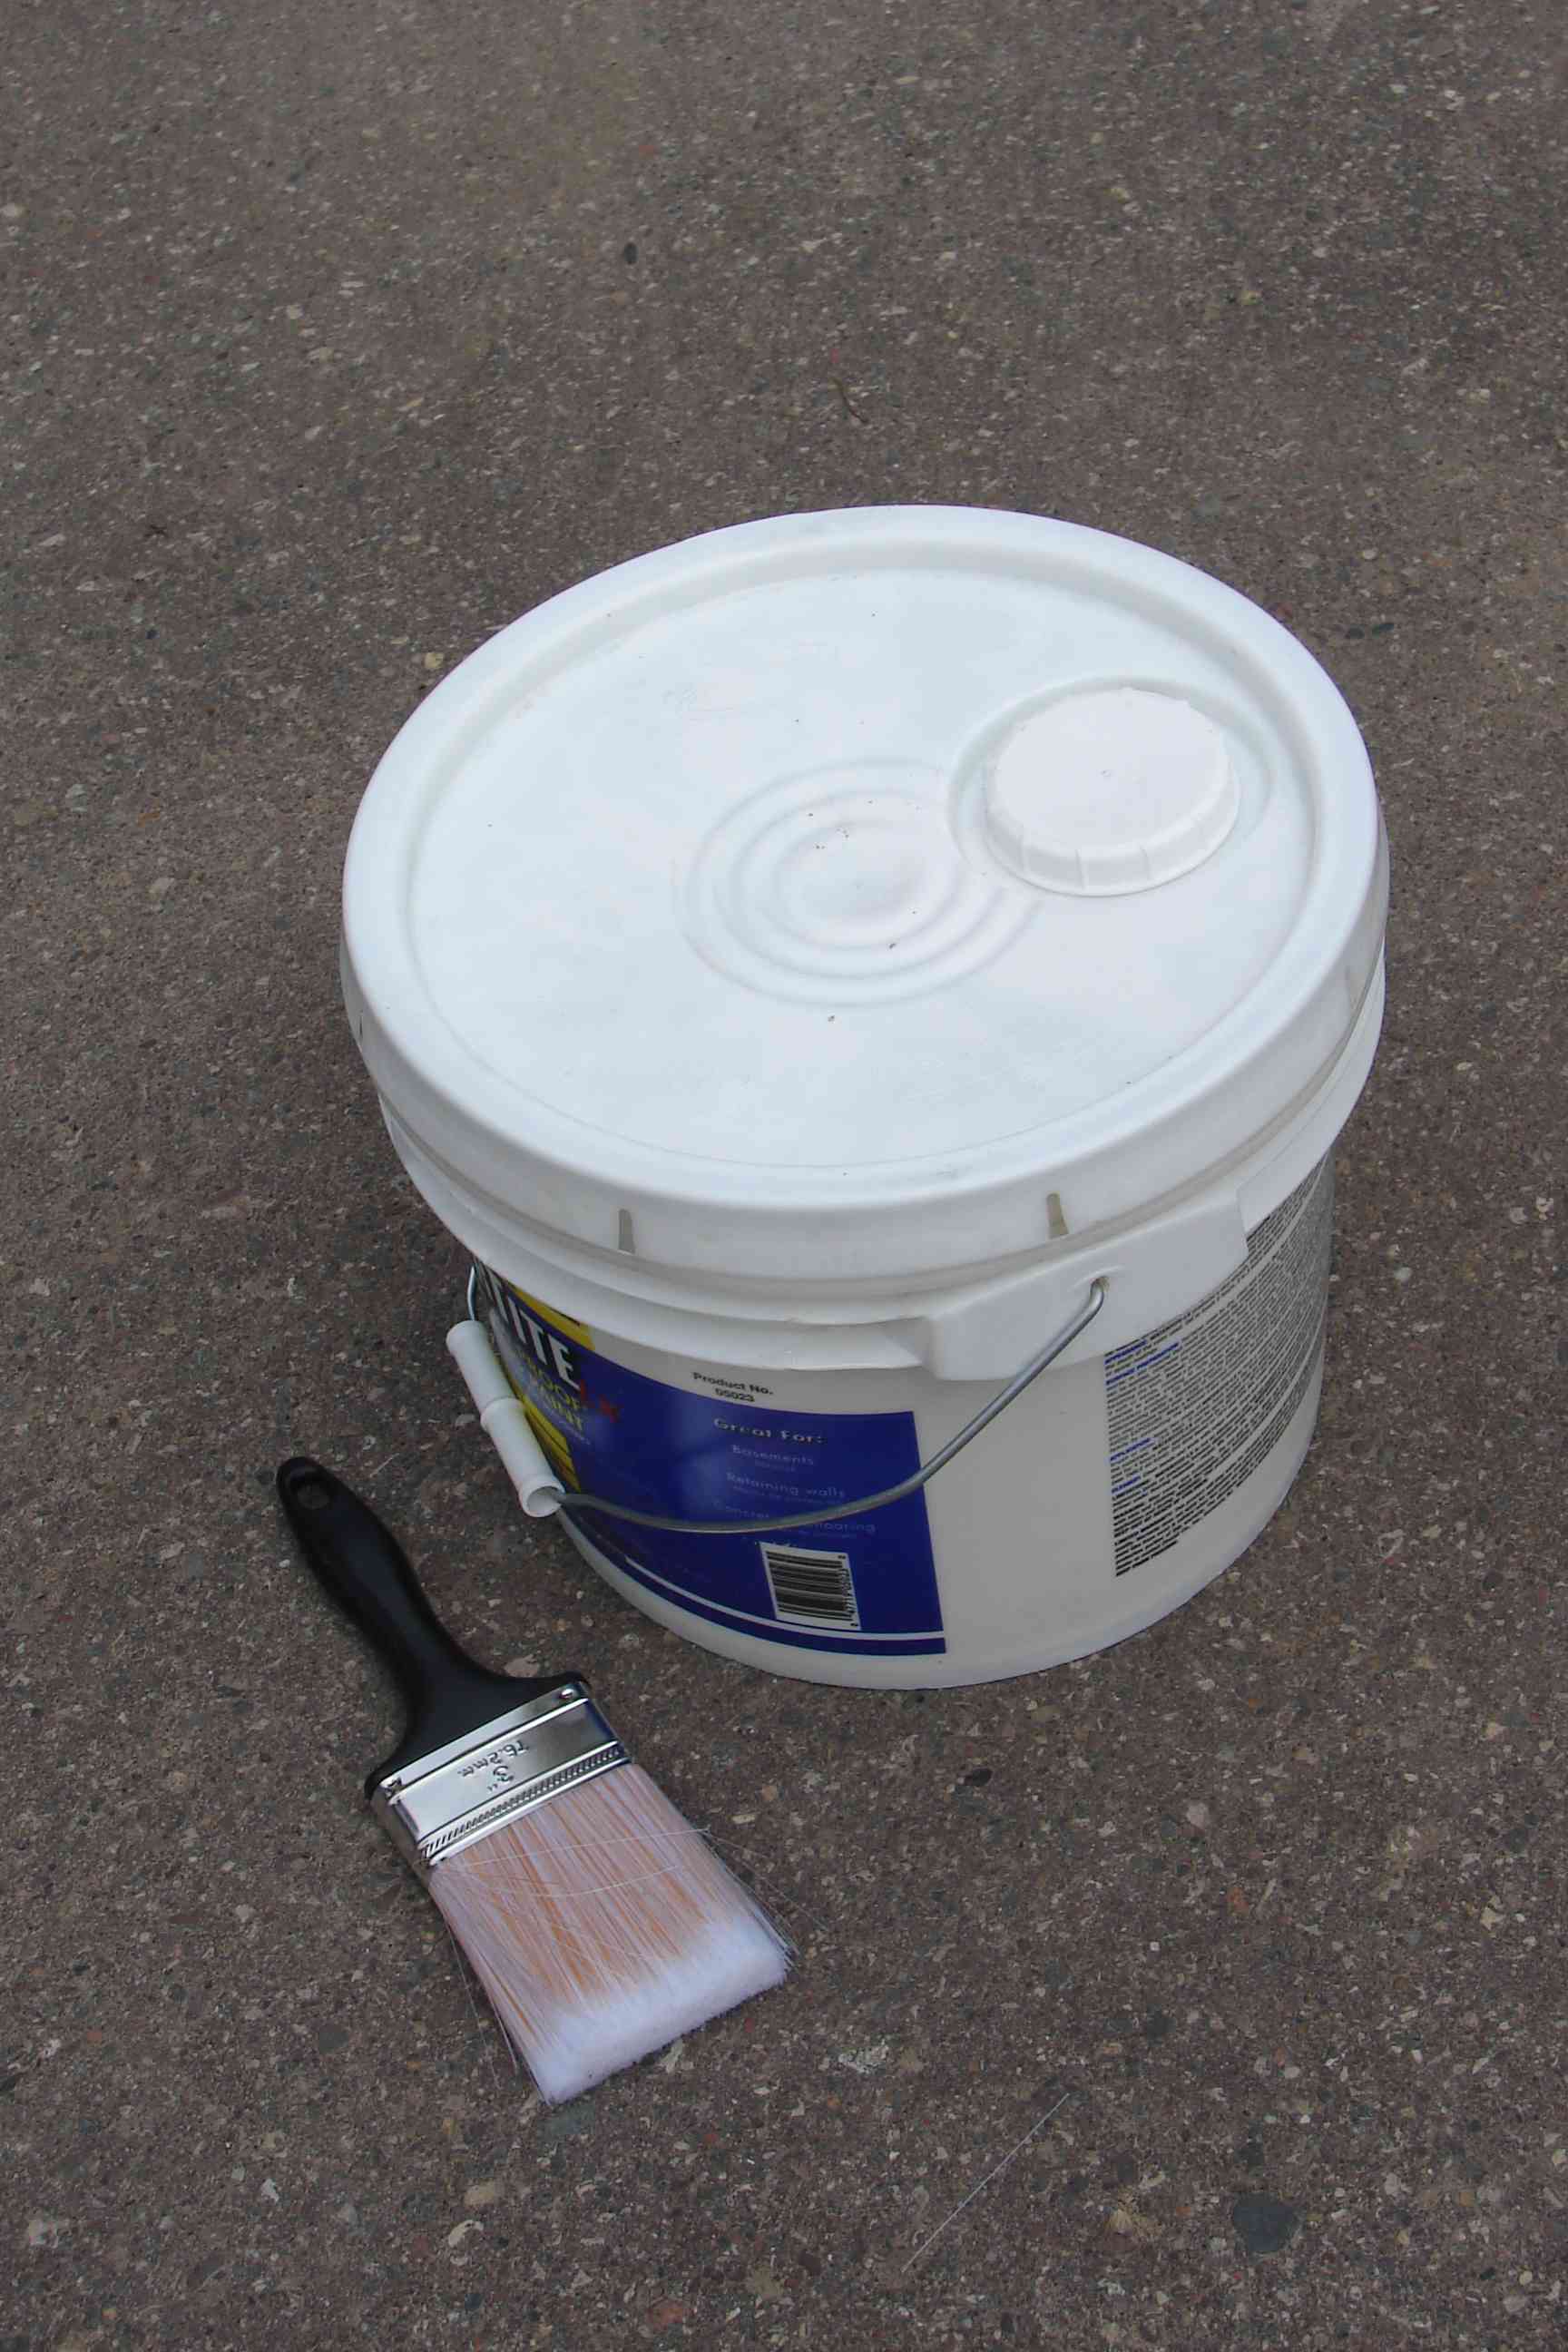 Plastic pail of paint and a paintbrush